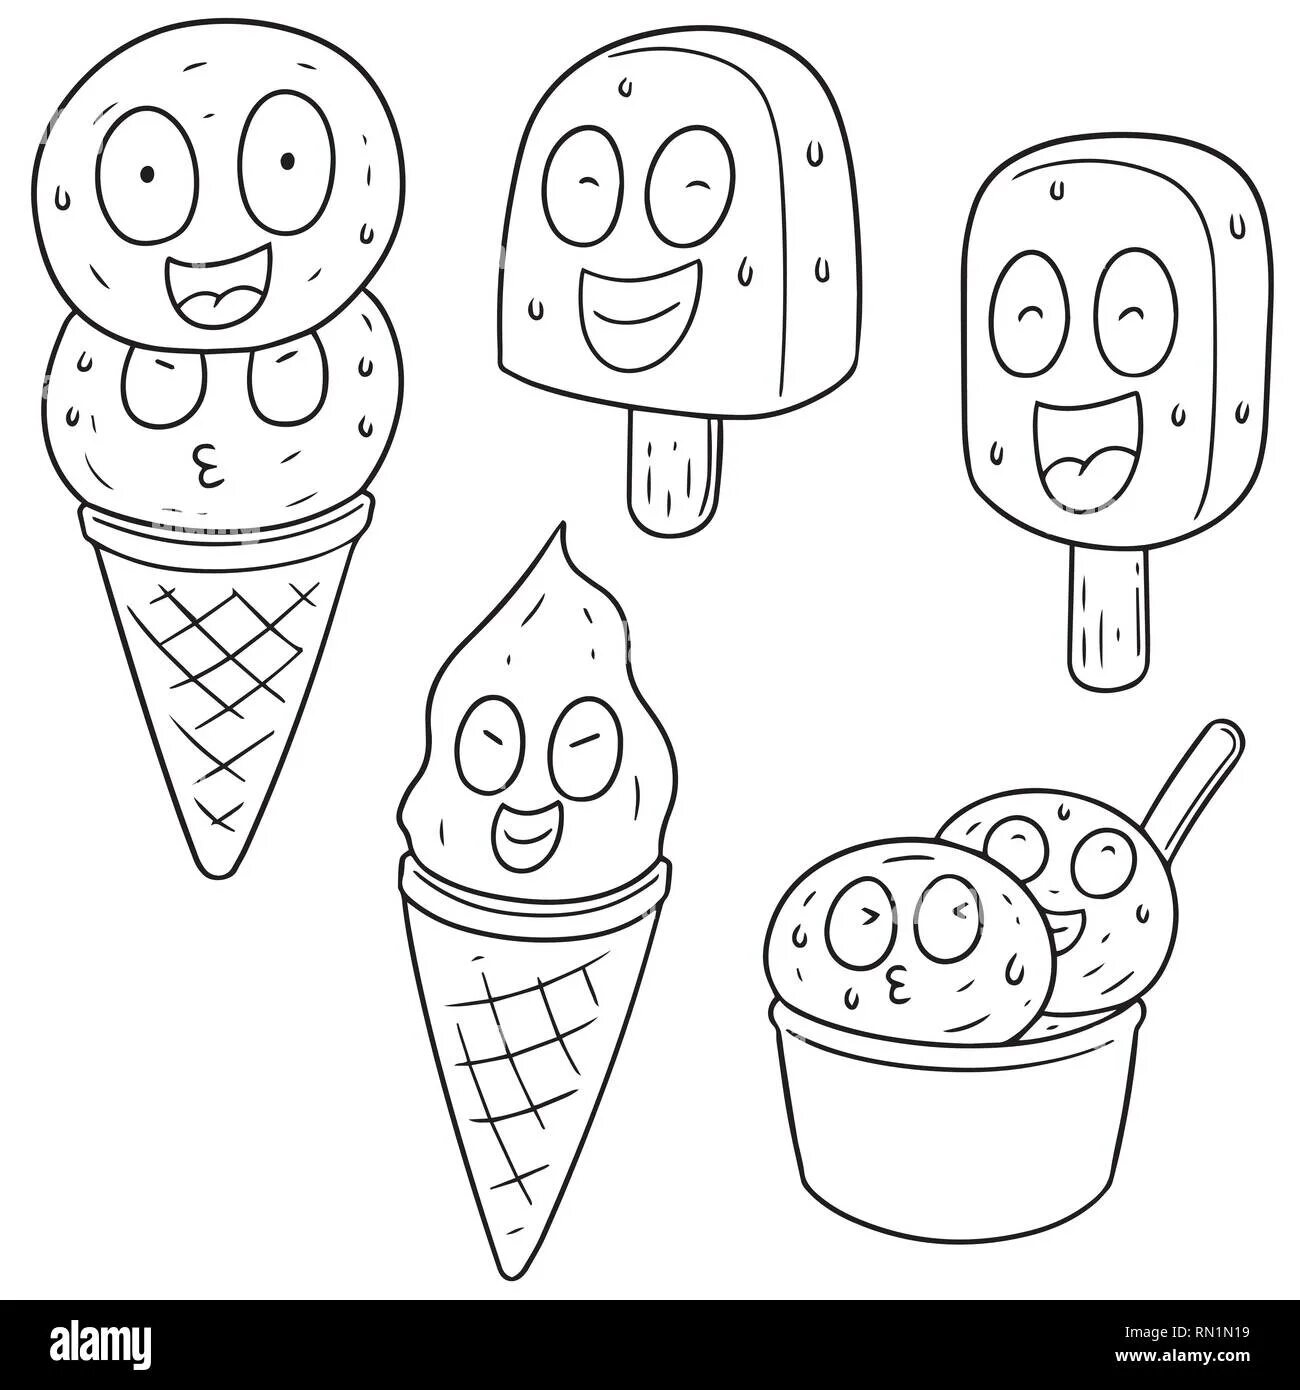 Crazy color ice cream mask coloring page